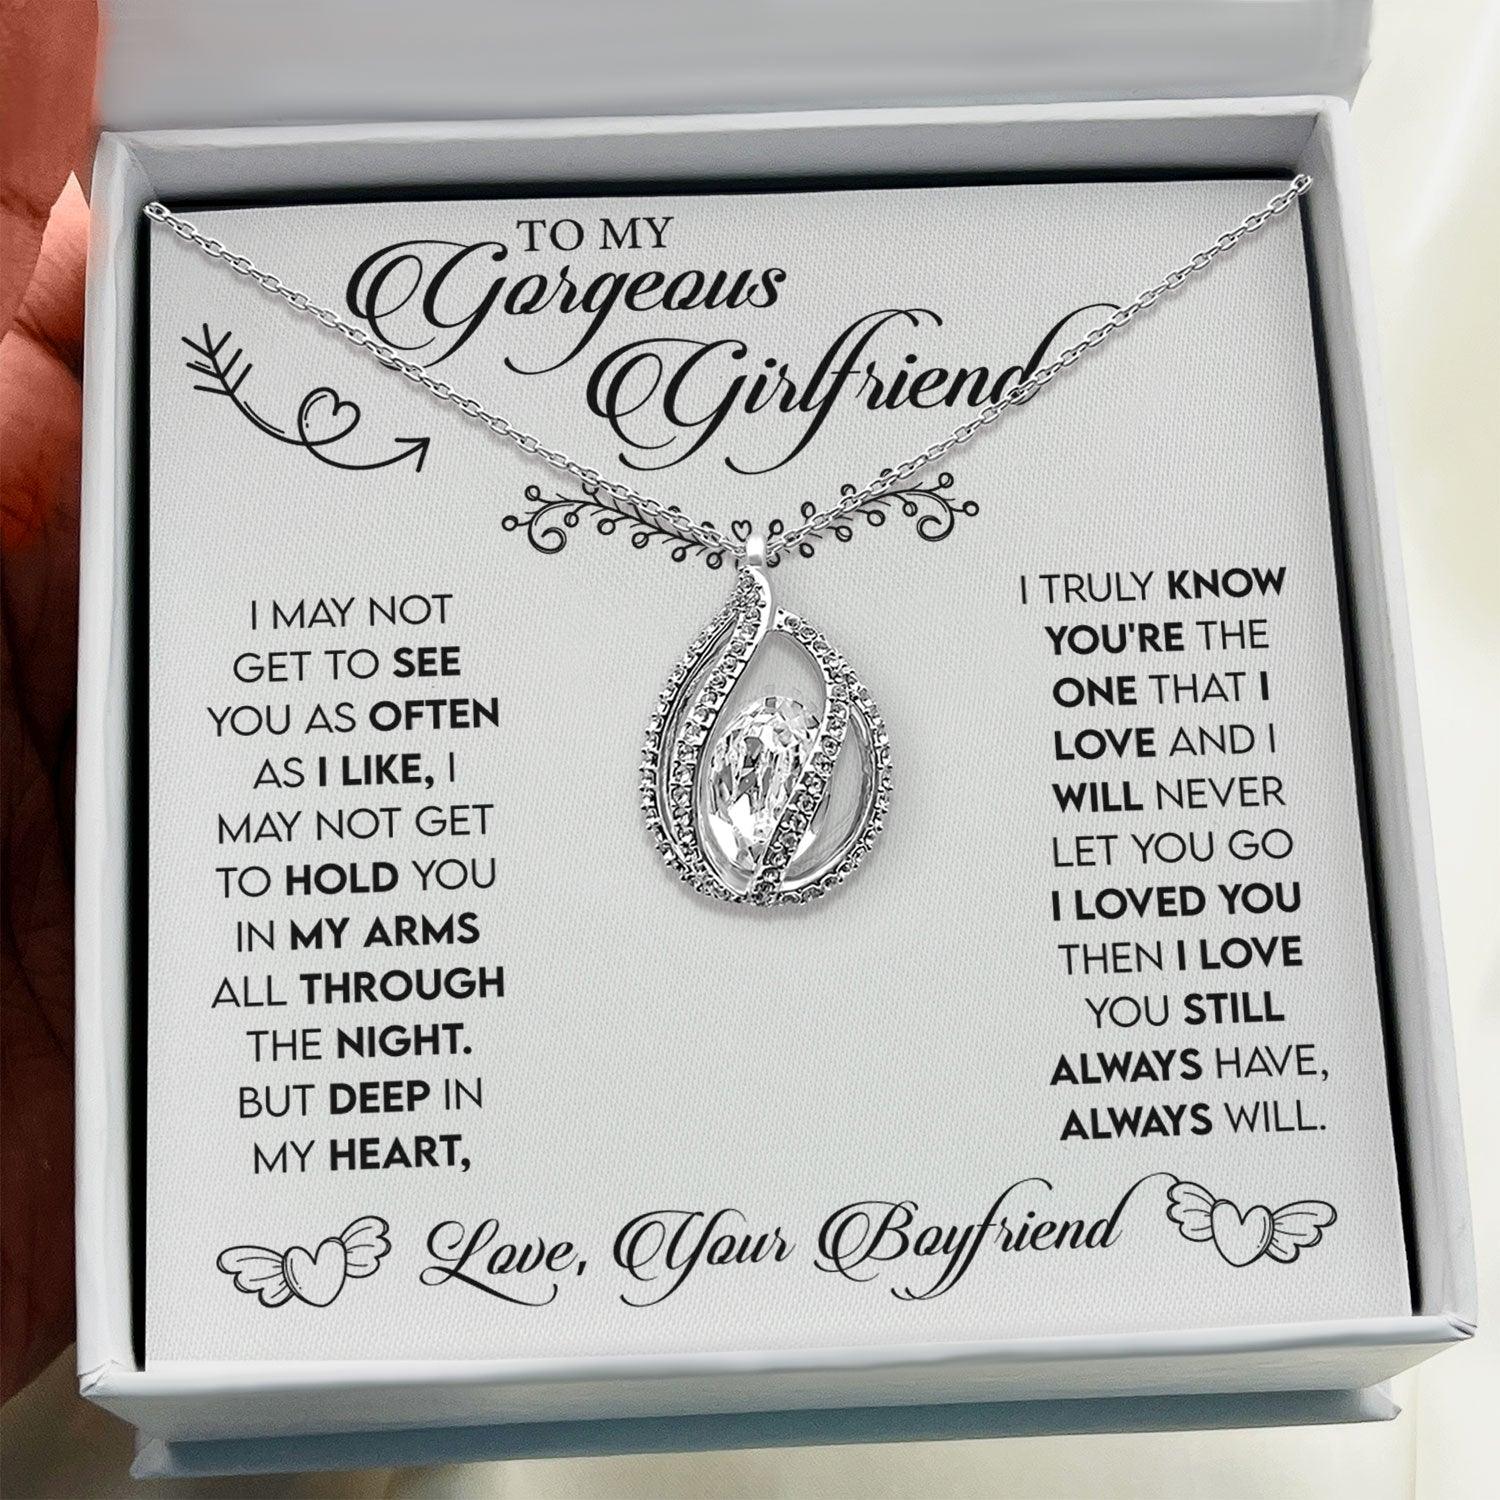 To My Gorgeous Girlfriend - I Truly know You Are The One That I Love - Orbital Birdcage Necklace - TRYNDI